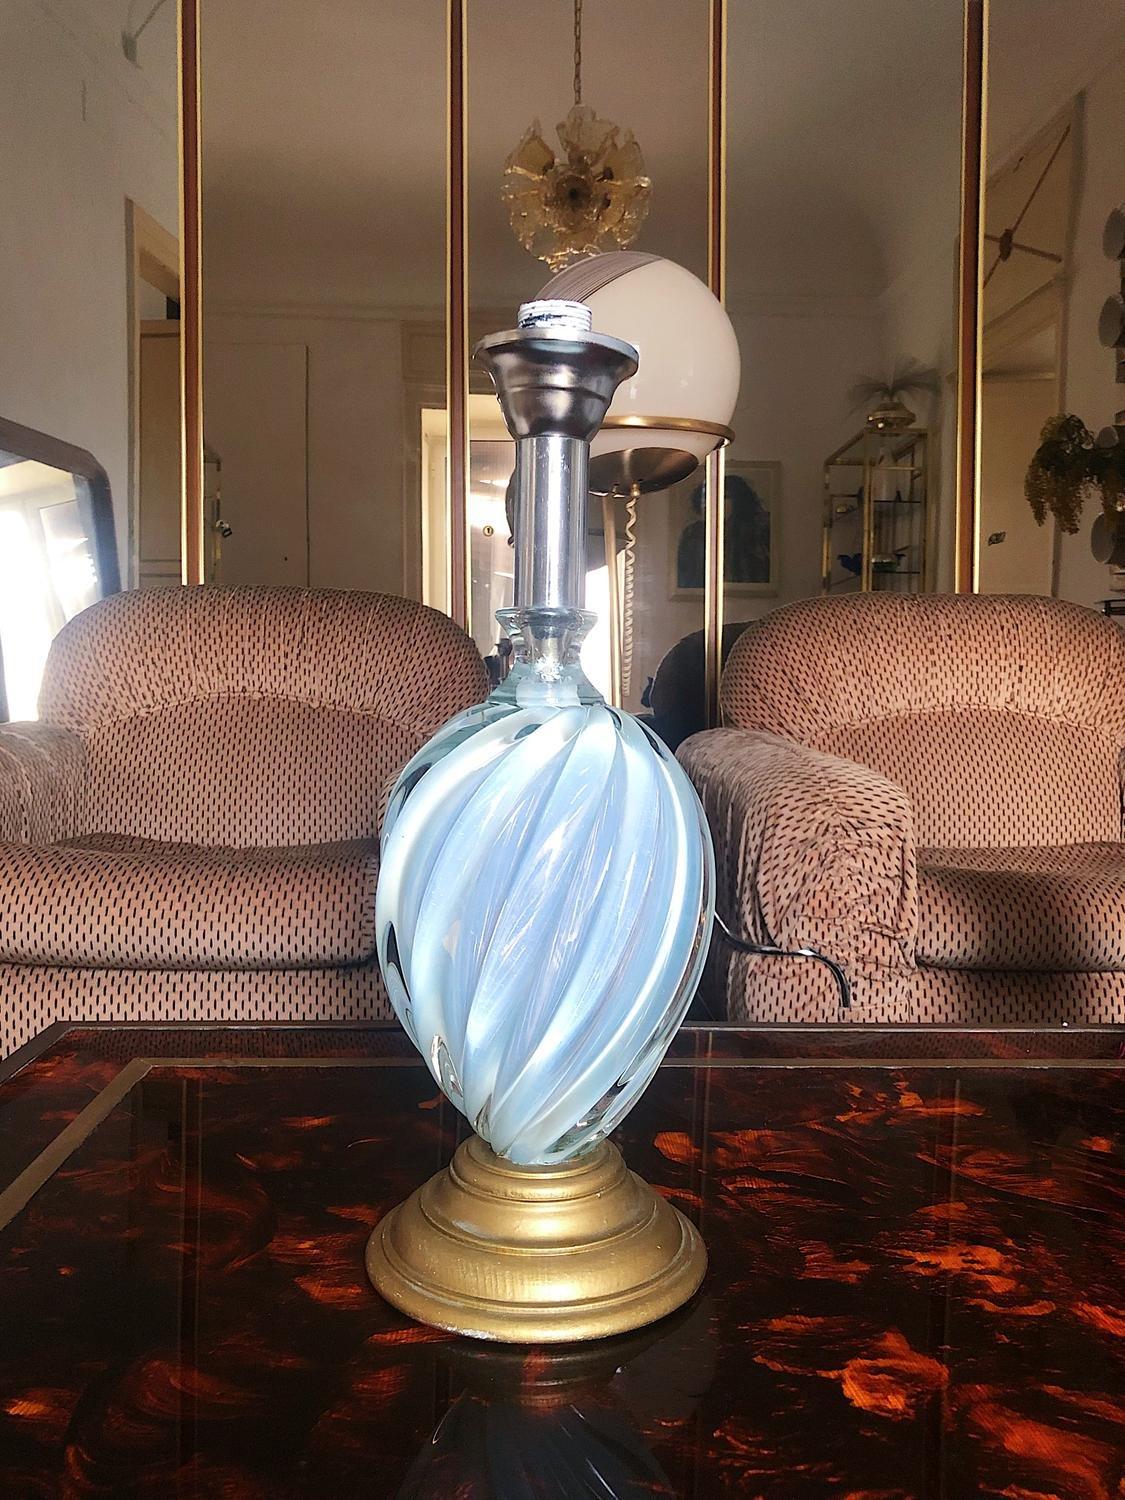 Superb ice blue Murano glass table lamp, made by Barovier & Toso in the 1960s
The lampshade is not included. 

Dimensions: height with lampshade: 70 cm height without lampshade 50cm
Materials and Techniques: chrome, glass, wood.

